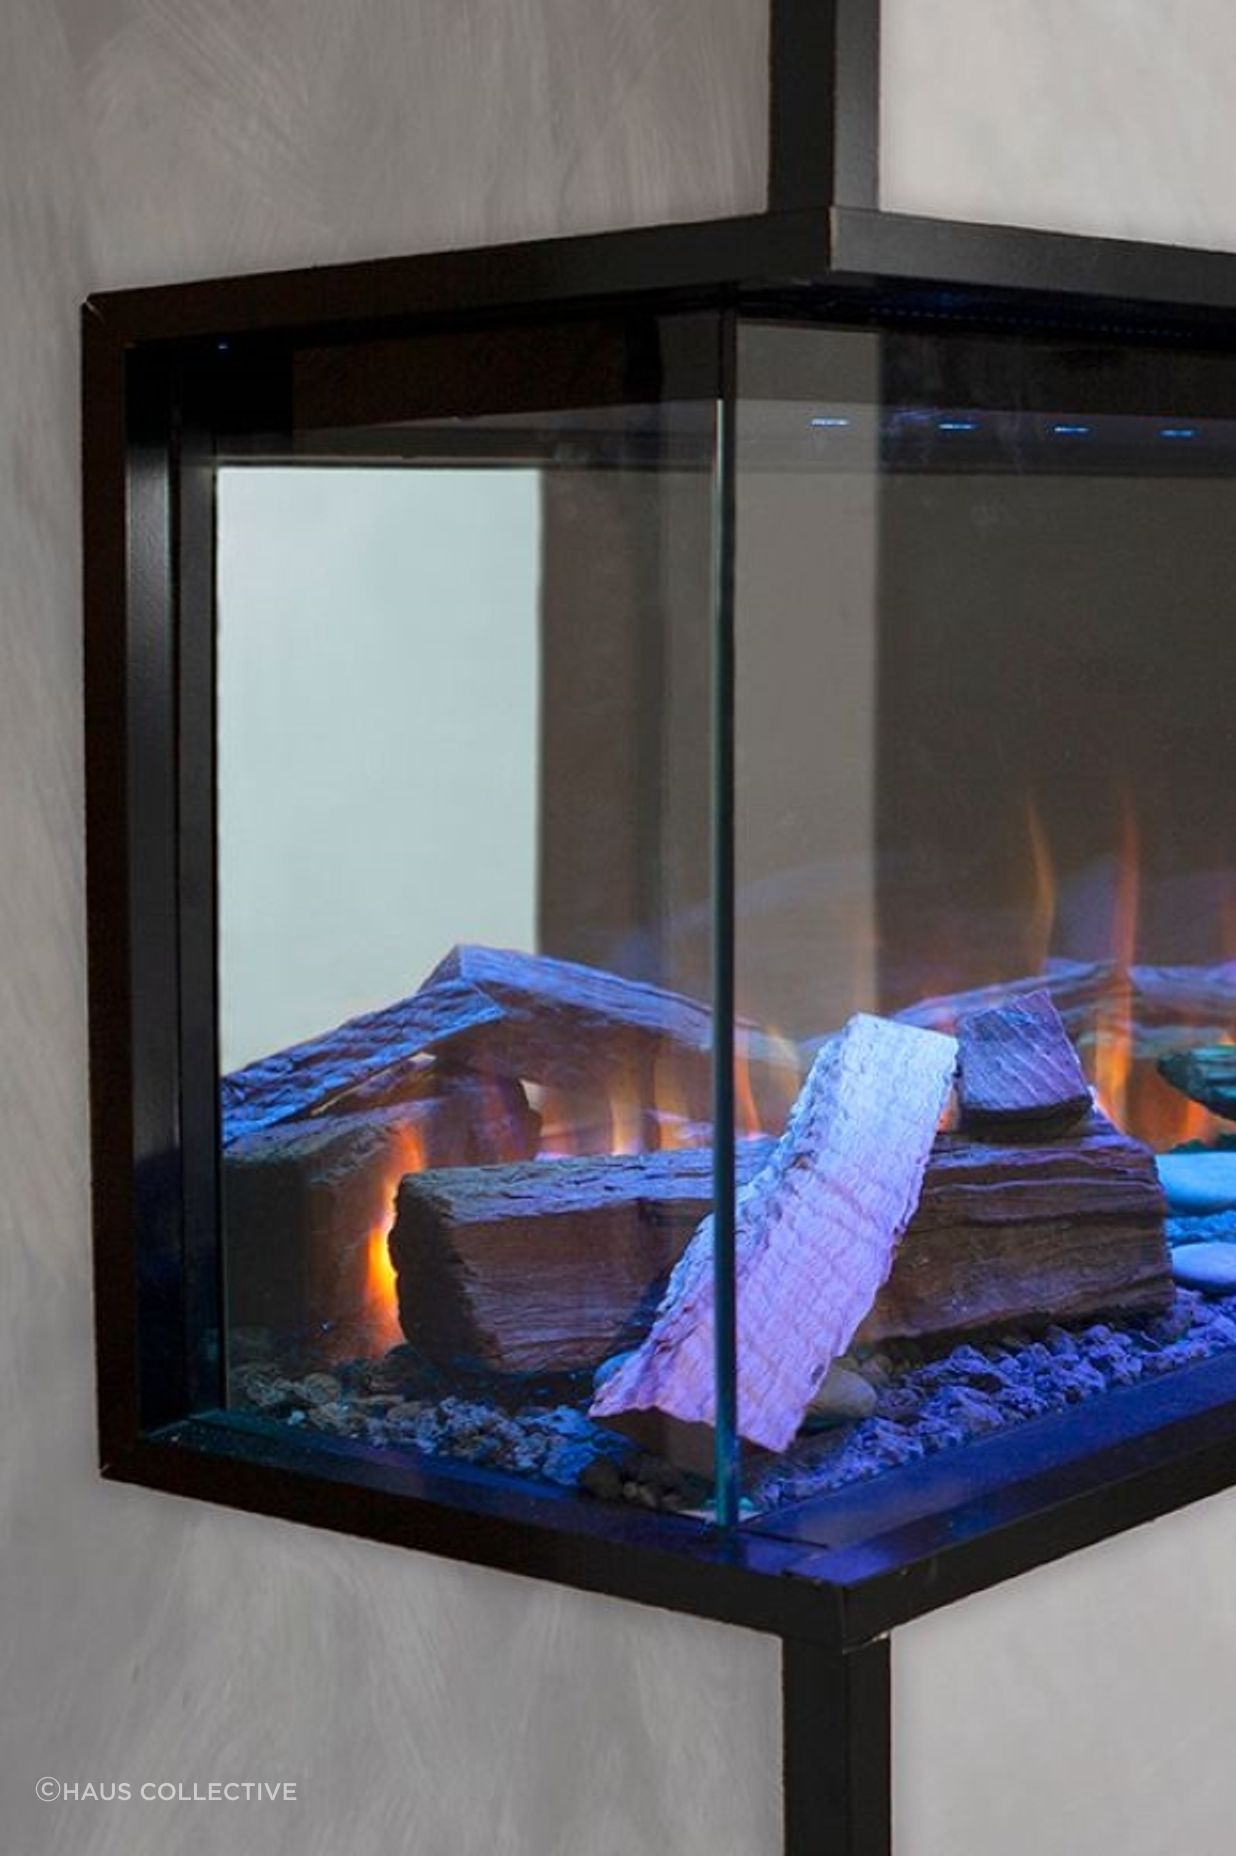 The blue flames that the Visionline Electric Fireplace offer elevate the sense of visual intrigue.